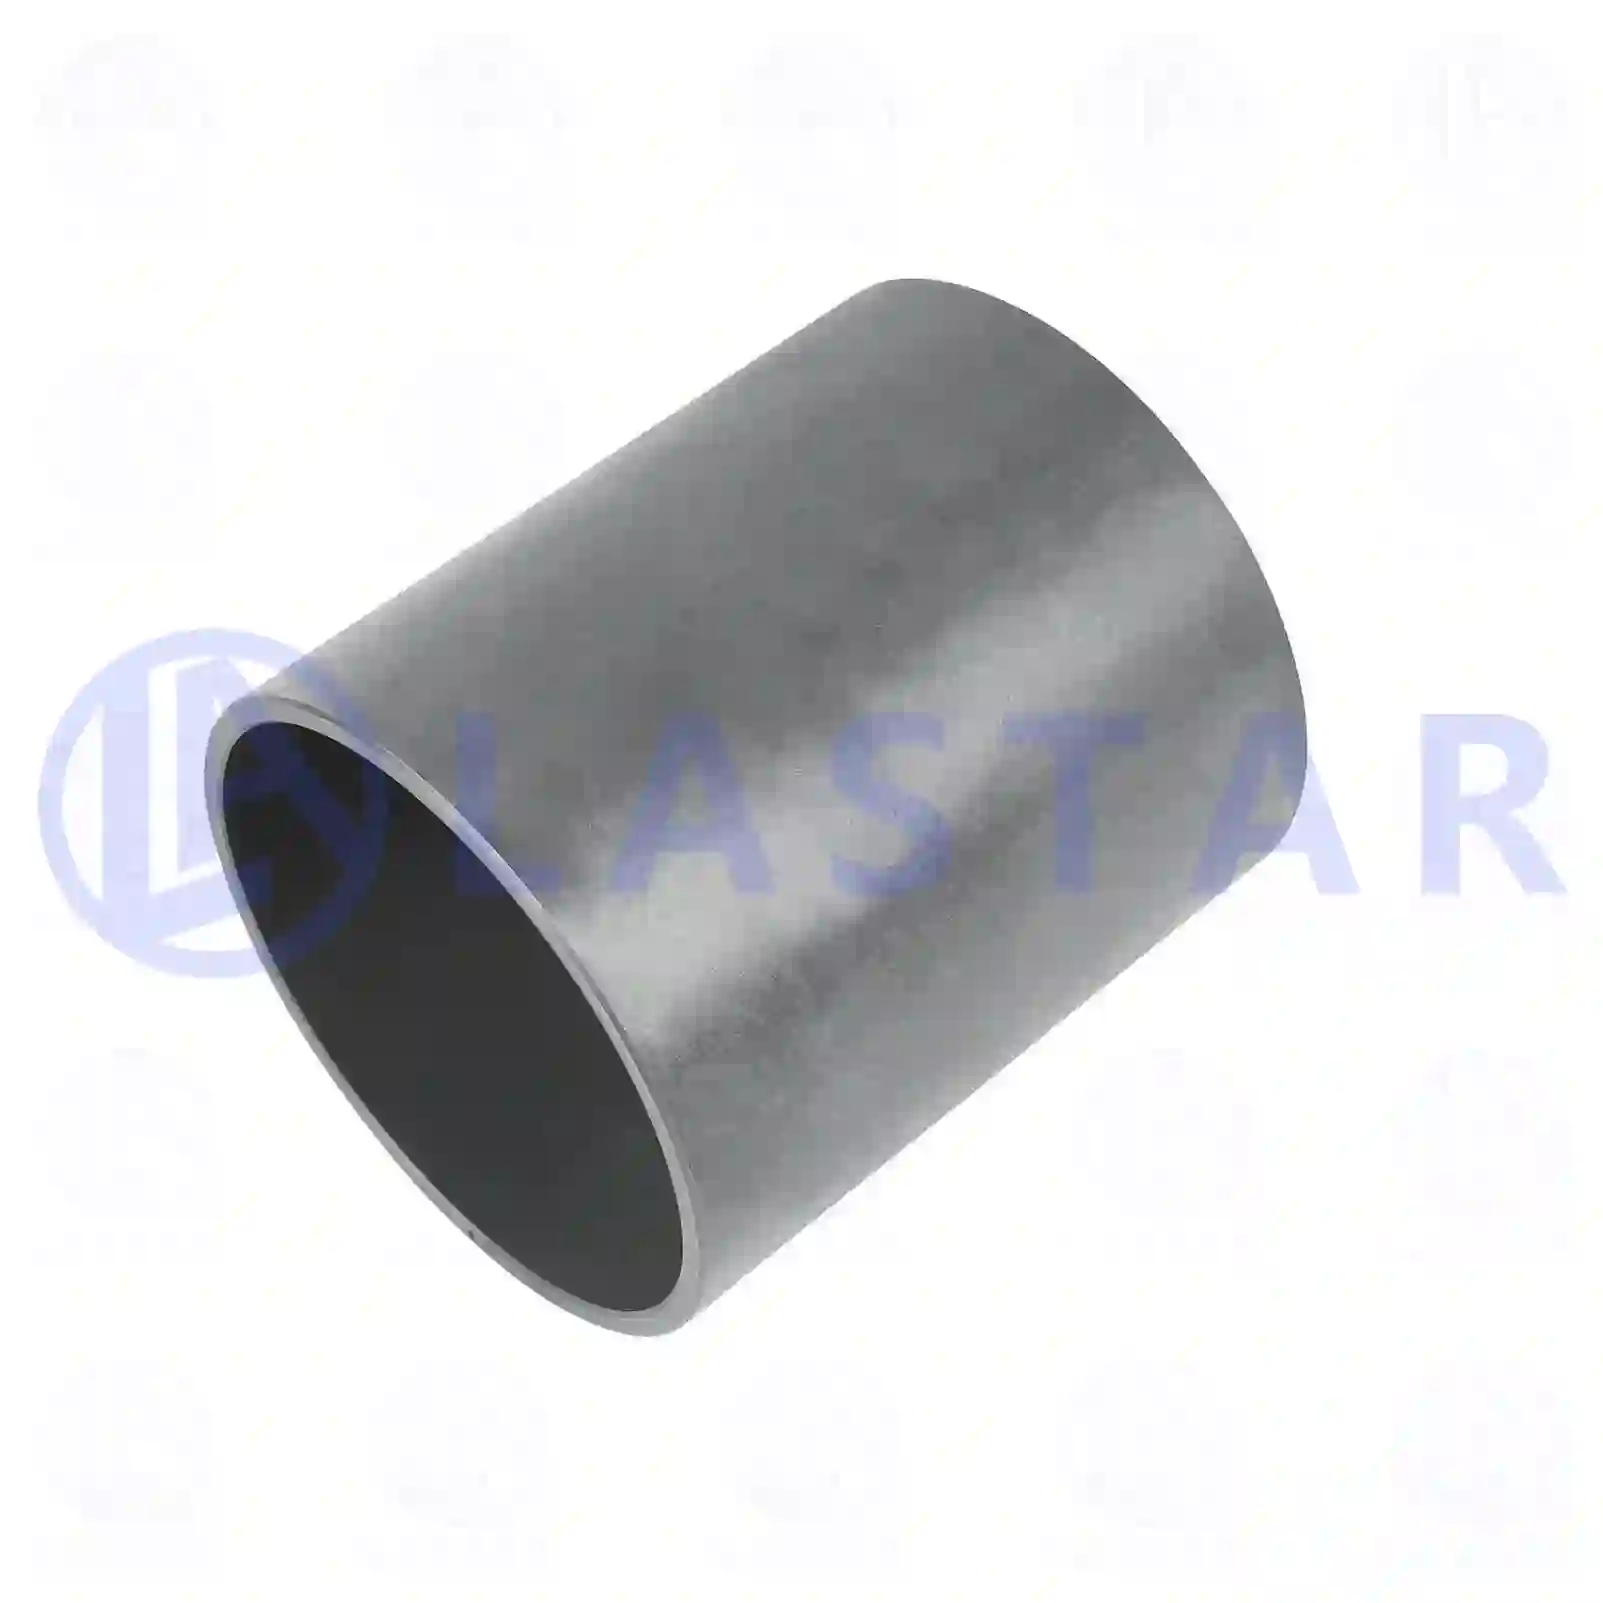 Distance sleeve, 77726842, 1507770, 291074, ZG21339-0008 ||  77726842 Lastar Spare Part | Truck Spare Parts, Auotomotive Spare Parts Distance sleeve, 77726842, 1507770, 291074, ZG21339-0008 ||  77726842 Lastar Spare Part | Truck Spare Parts, Auotomotive Spare Parts